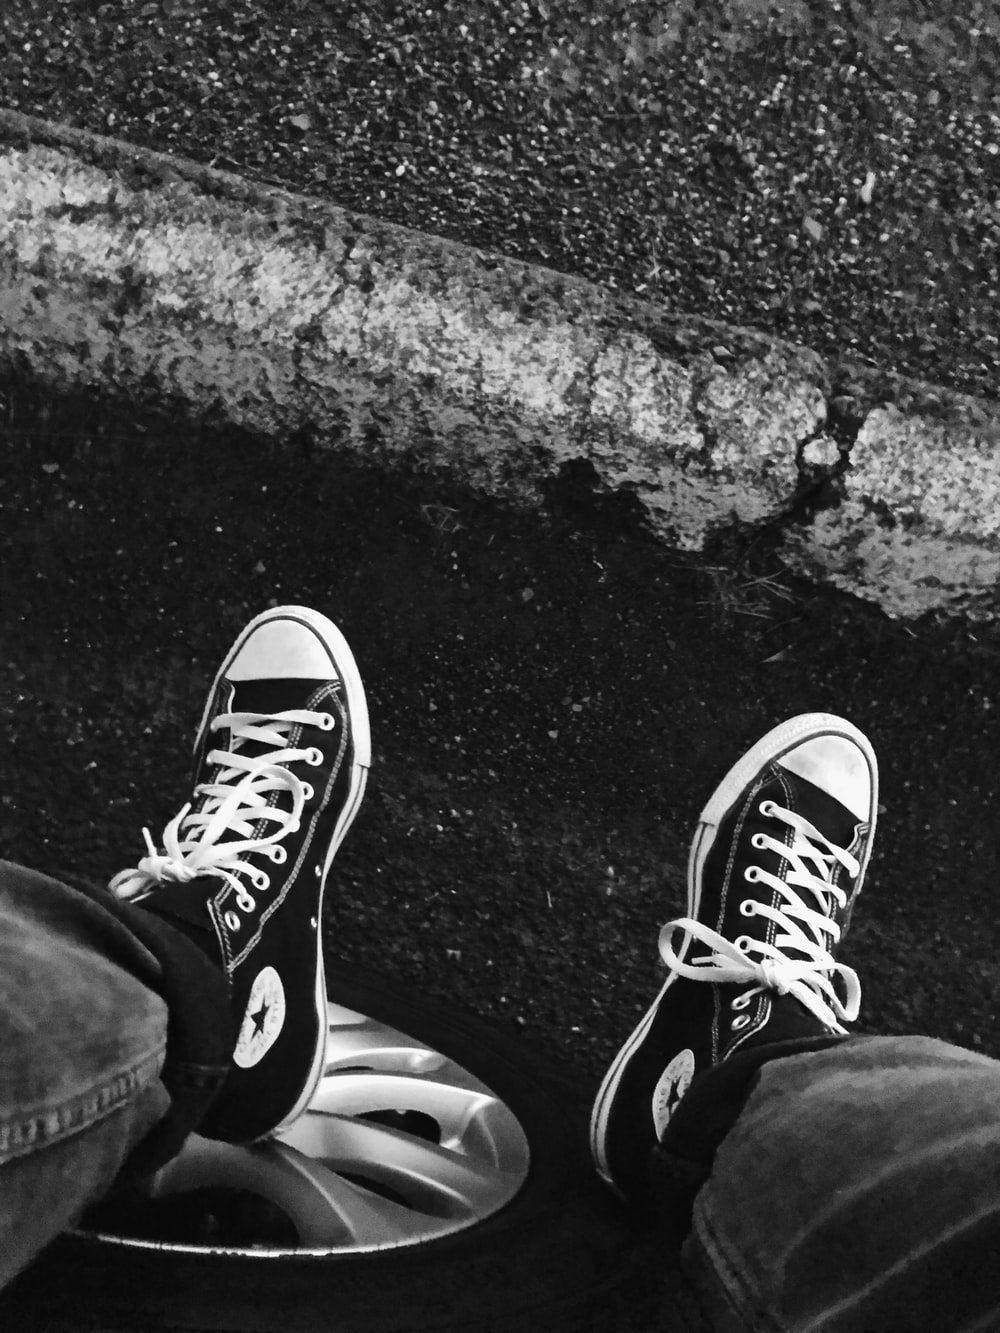 Converse Picture. Download Free Image